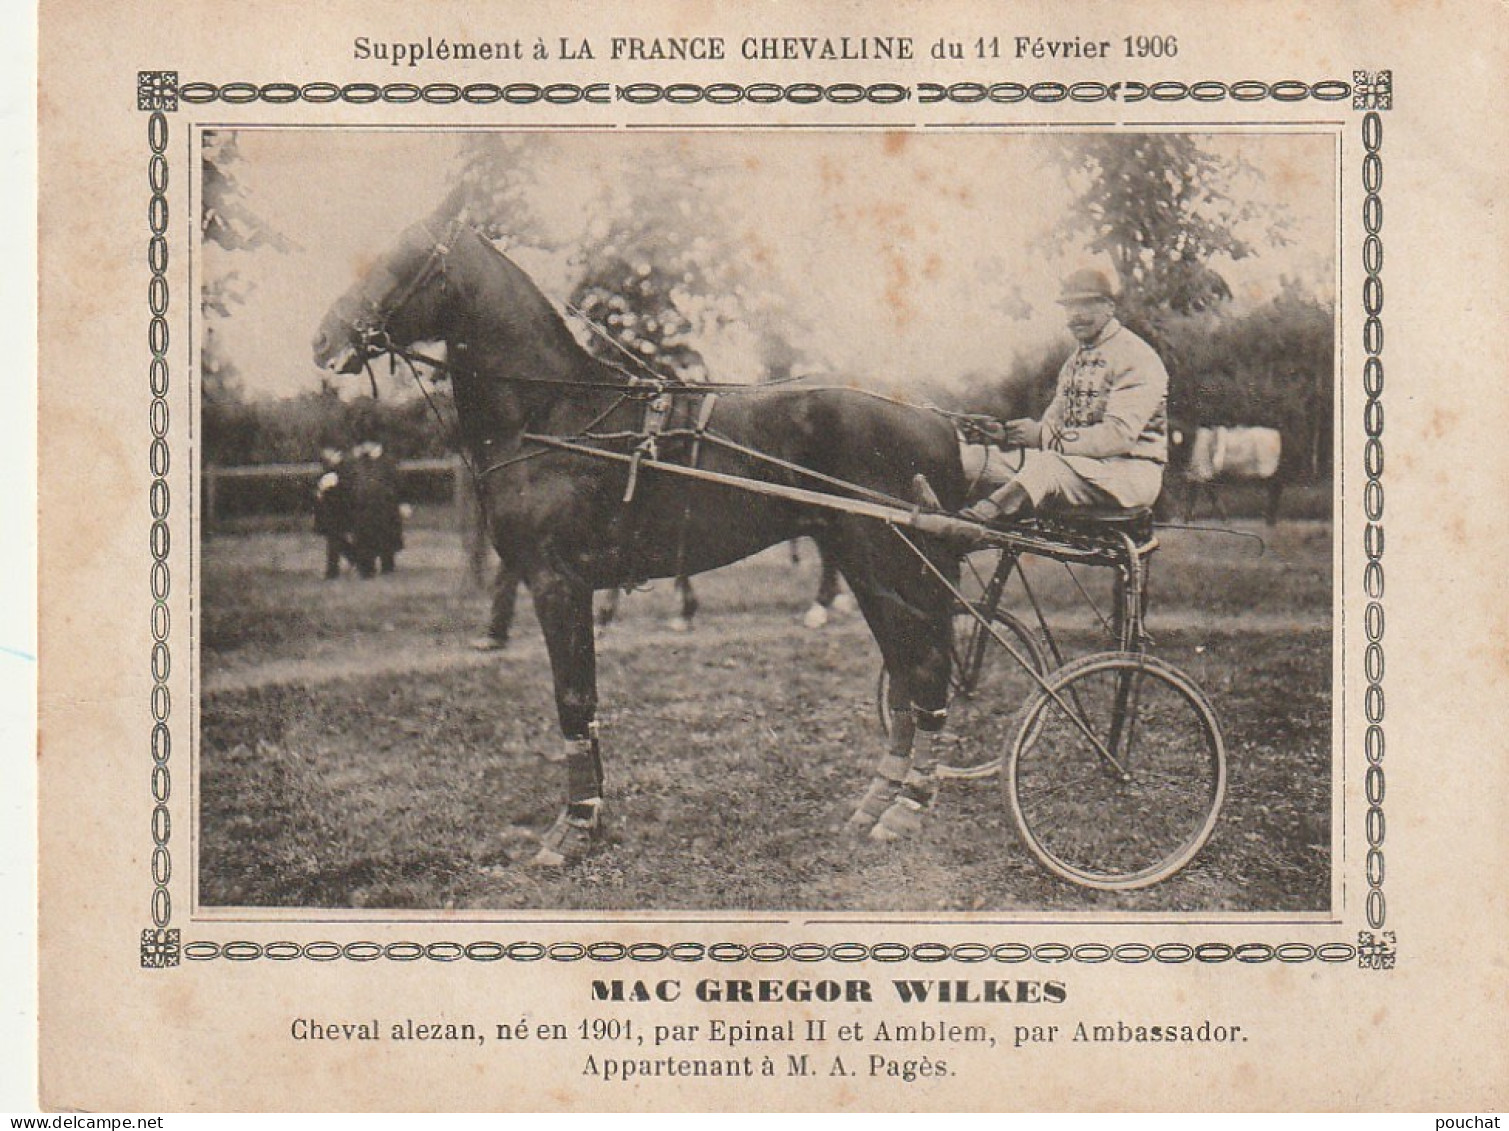 AA+ - " MAC GREGOR WILKES " - CHEVAL ALEZAN APPARTENANT A M. A. PAGES - SUPPL. " FRANCE CHEVALINE " , FEV. 1906 - SULKY - Hippisme